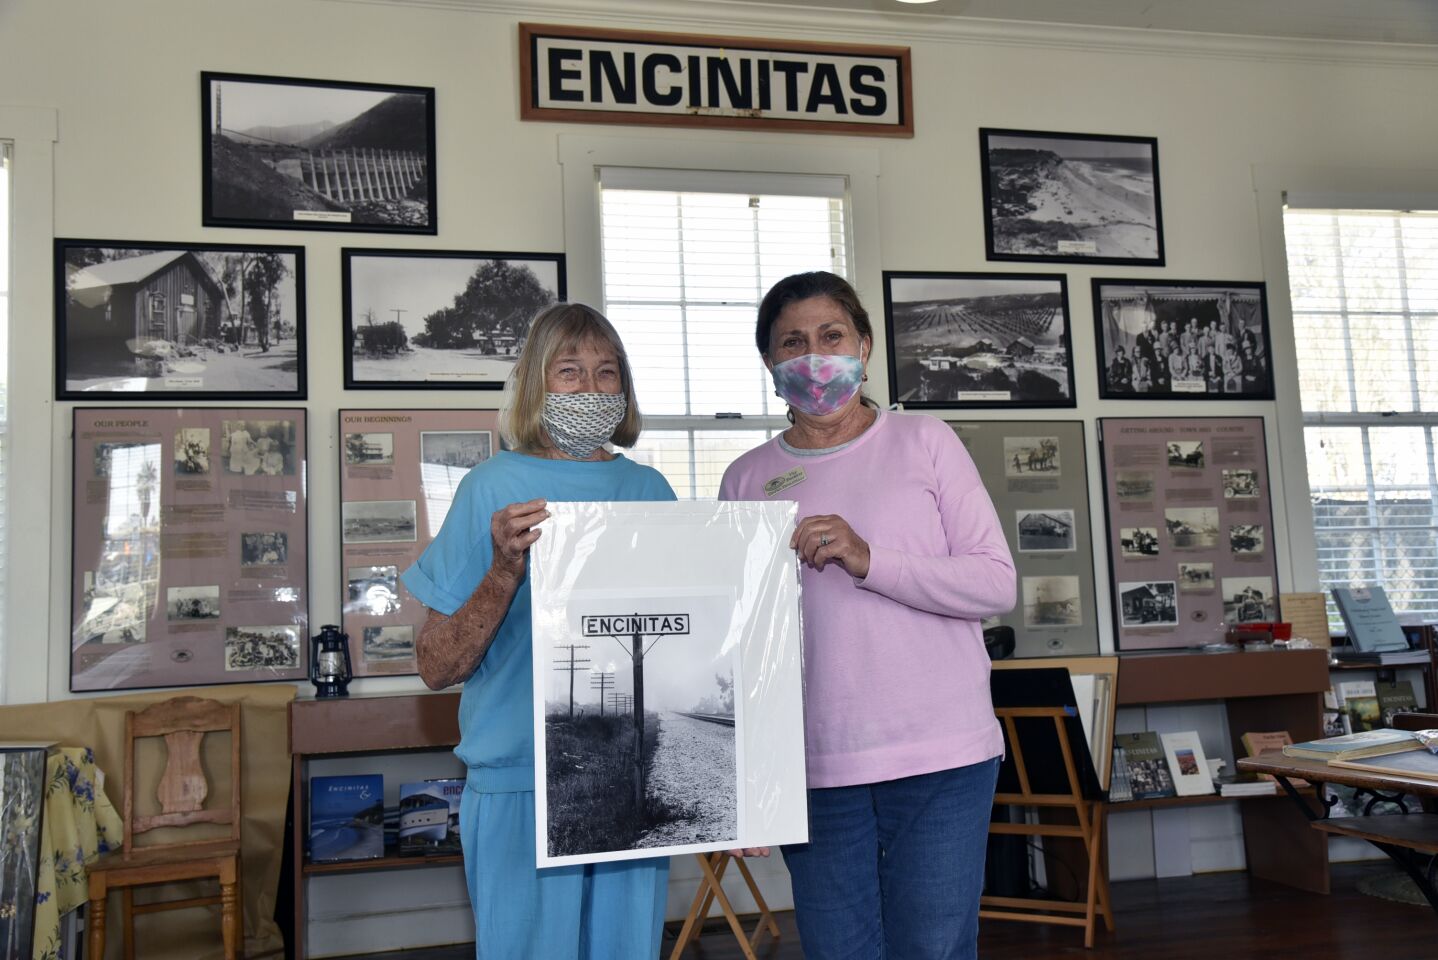 Pam Hammond Walker (great great grandaughter of schoolhouse builder EG Hammond) and Encinitas Historical Society Vice President Dana Donatelli hold a photo of a railroad sign that was recently added to the Society's collection